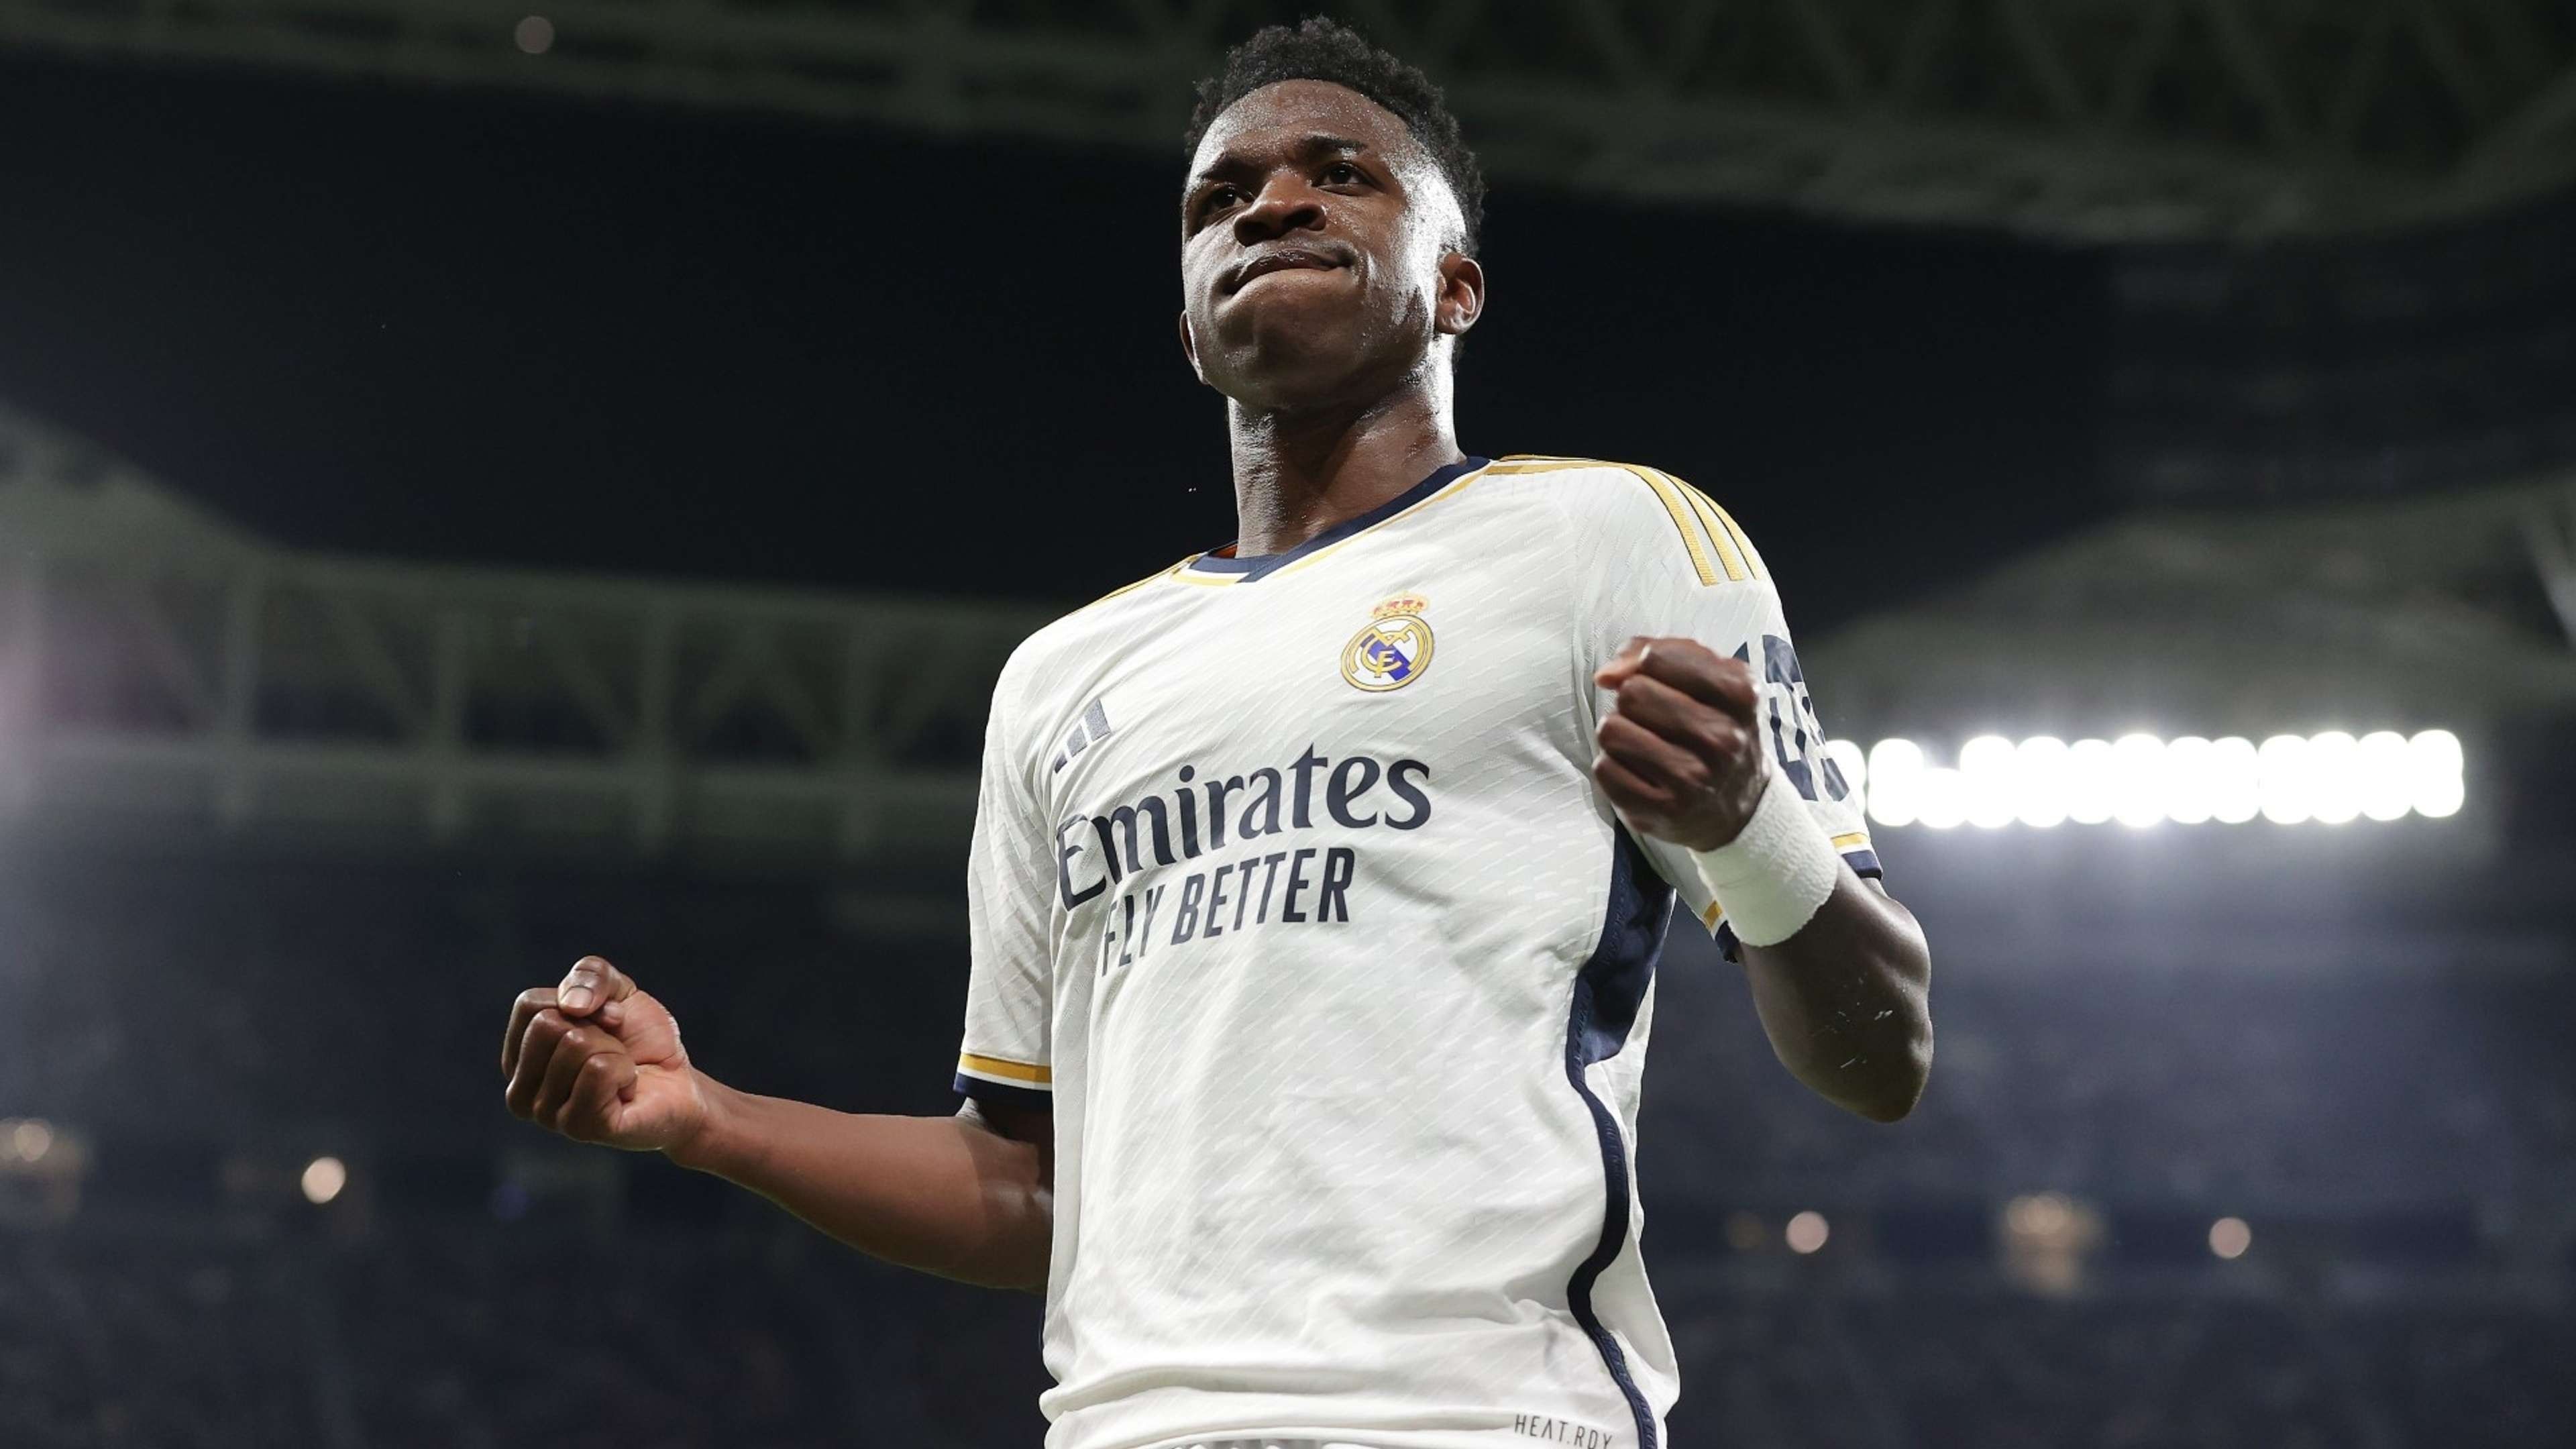 PSG Want To Buy Vinicius From Real Madrid To Replace Mbappe